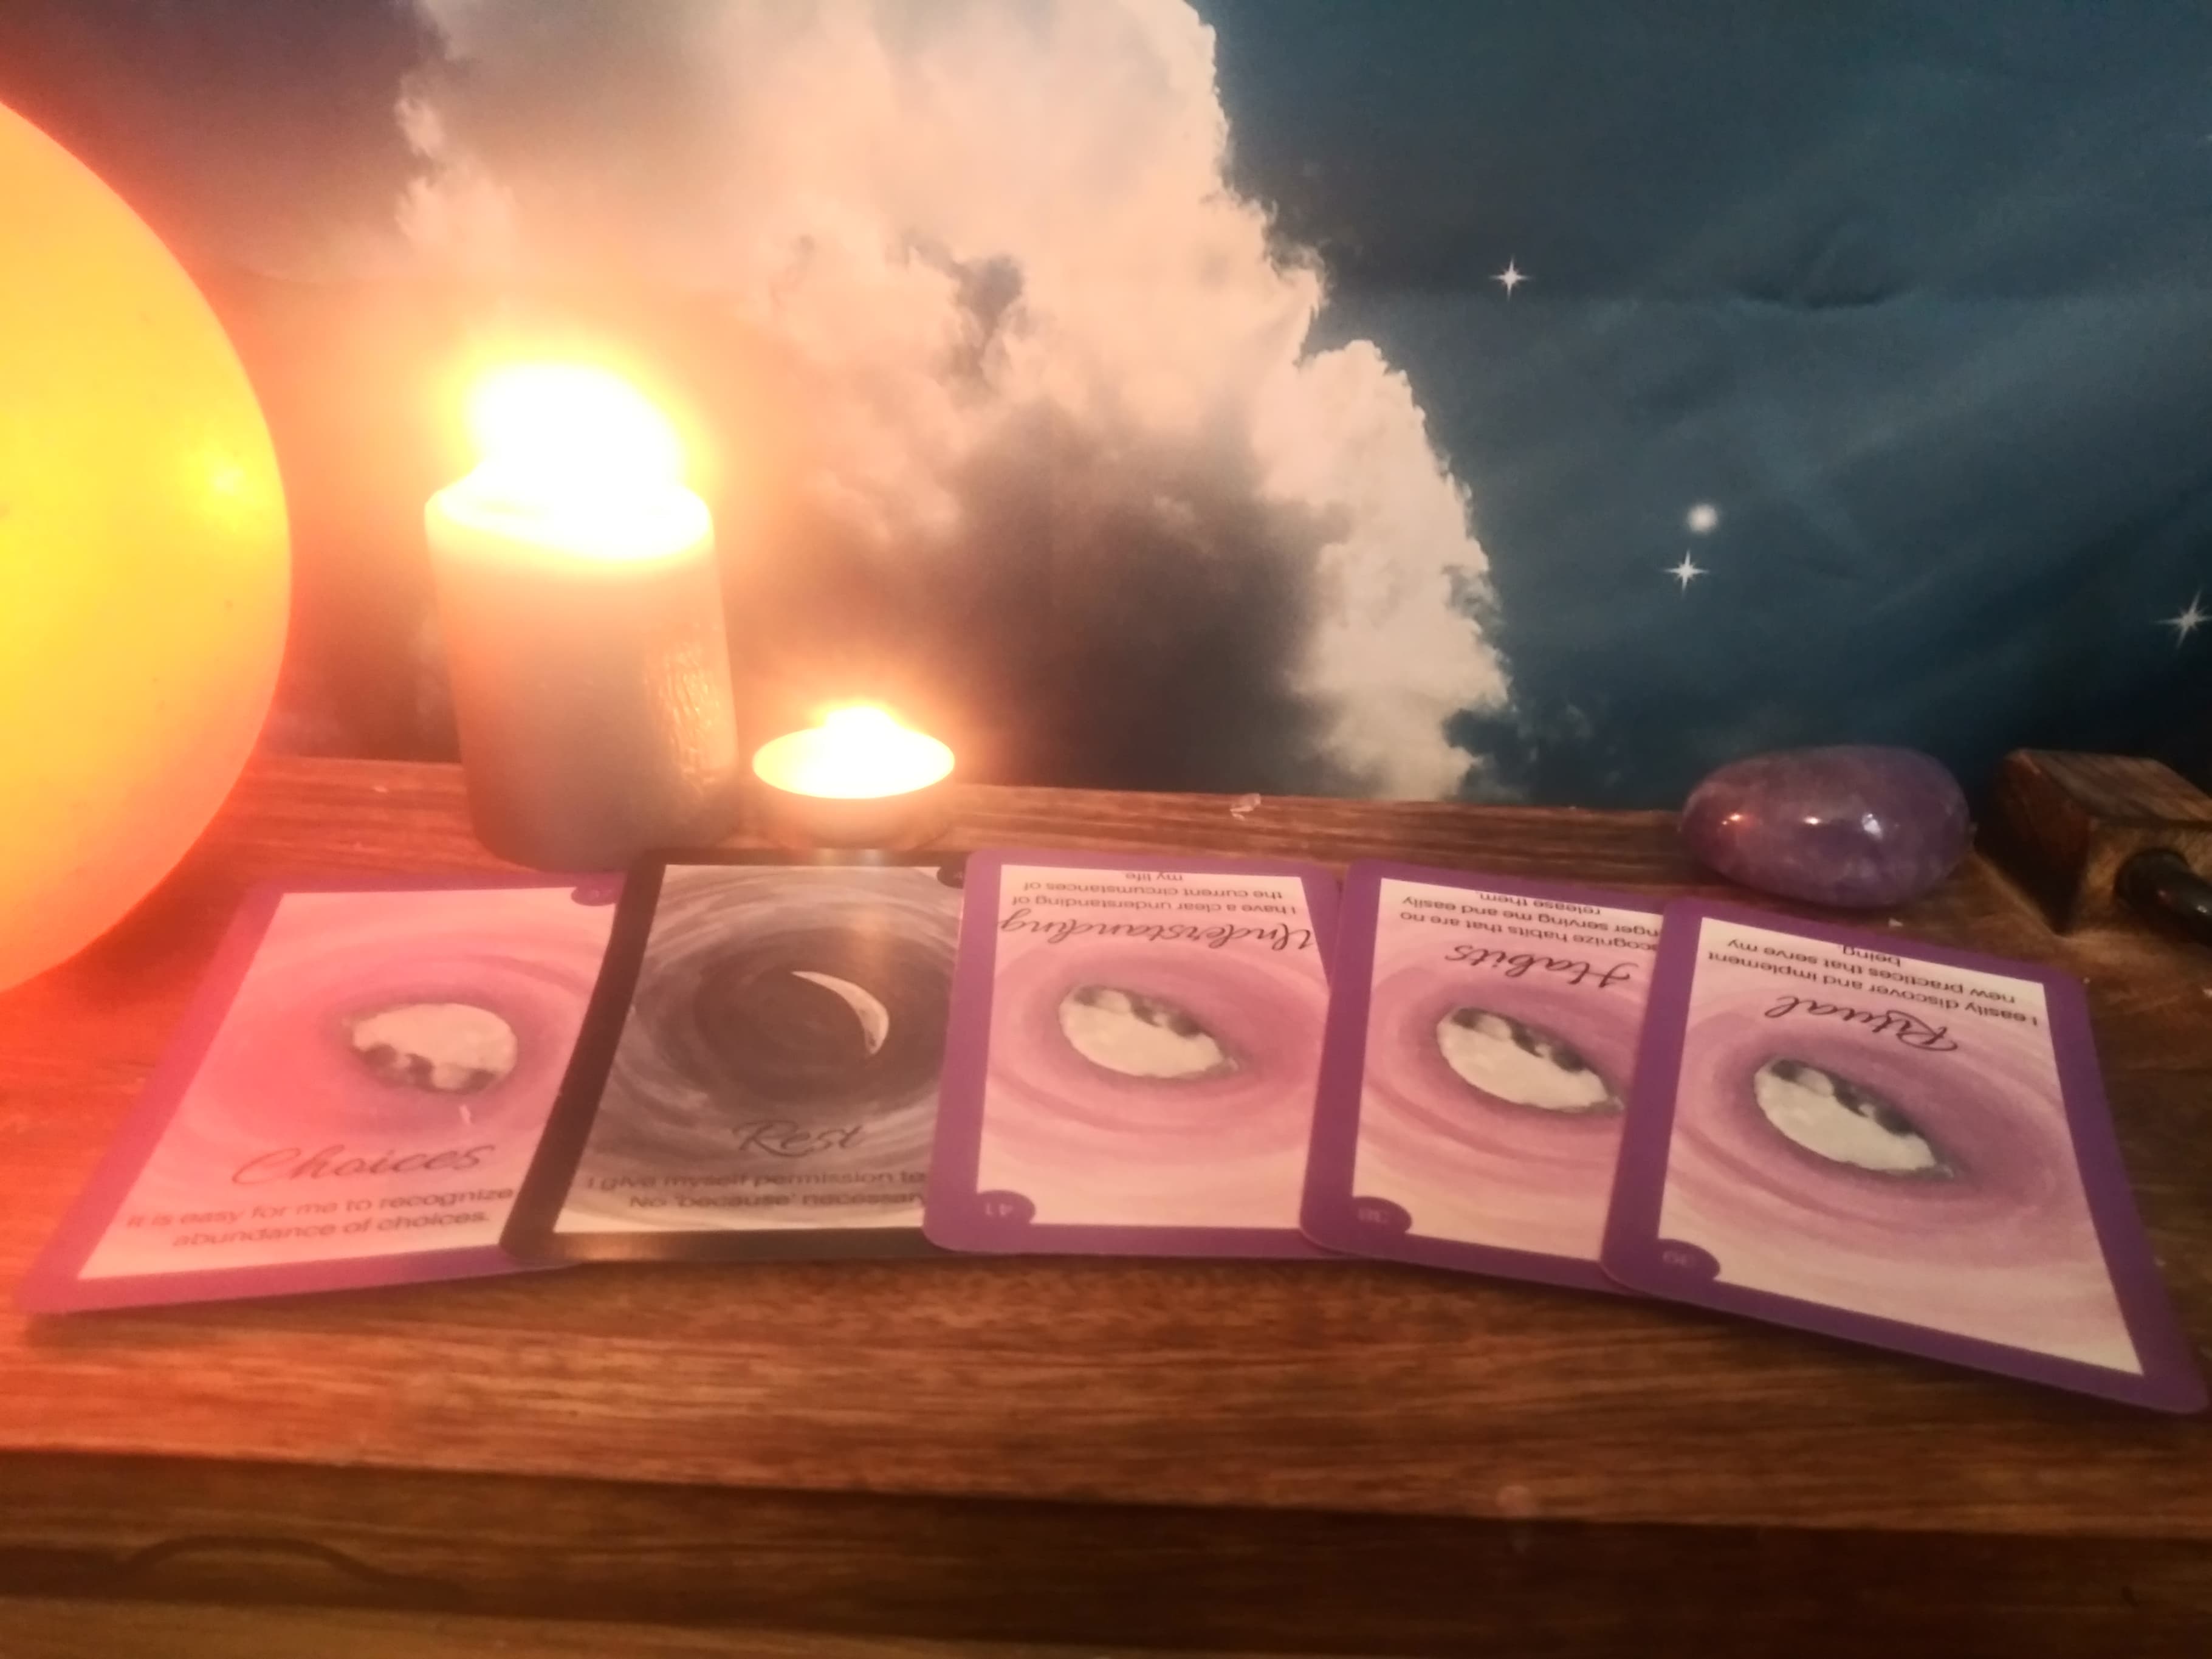 oracle cards